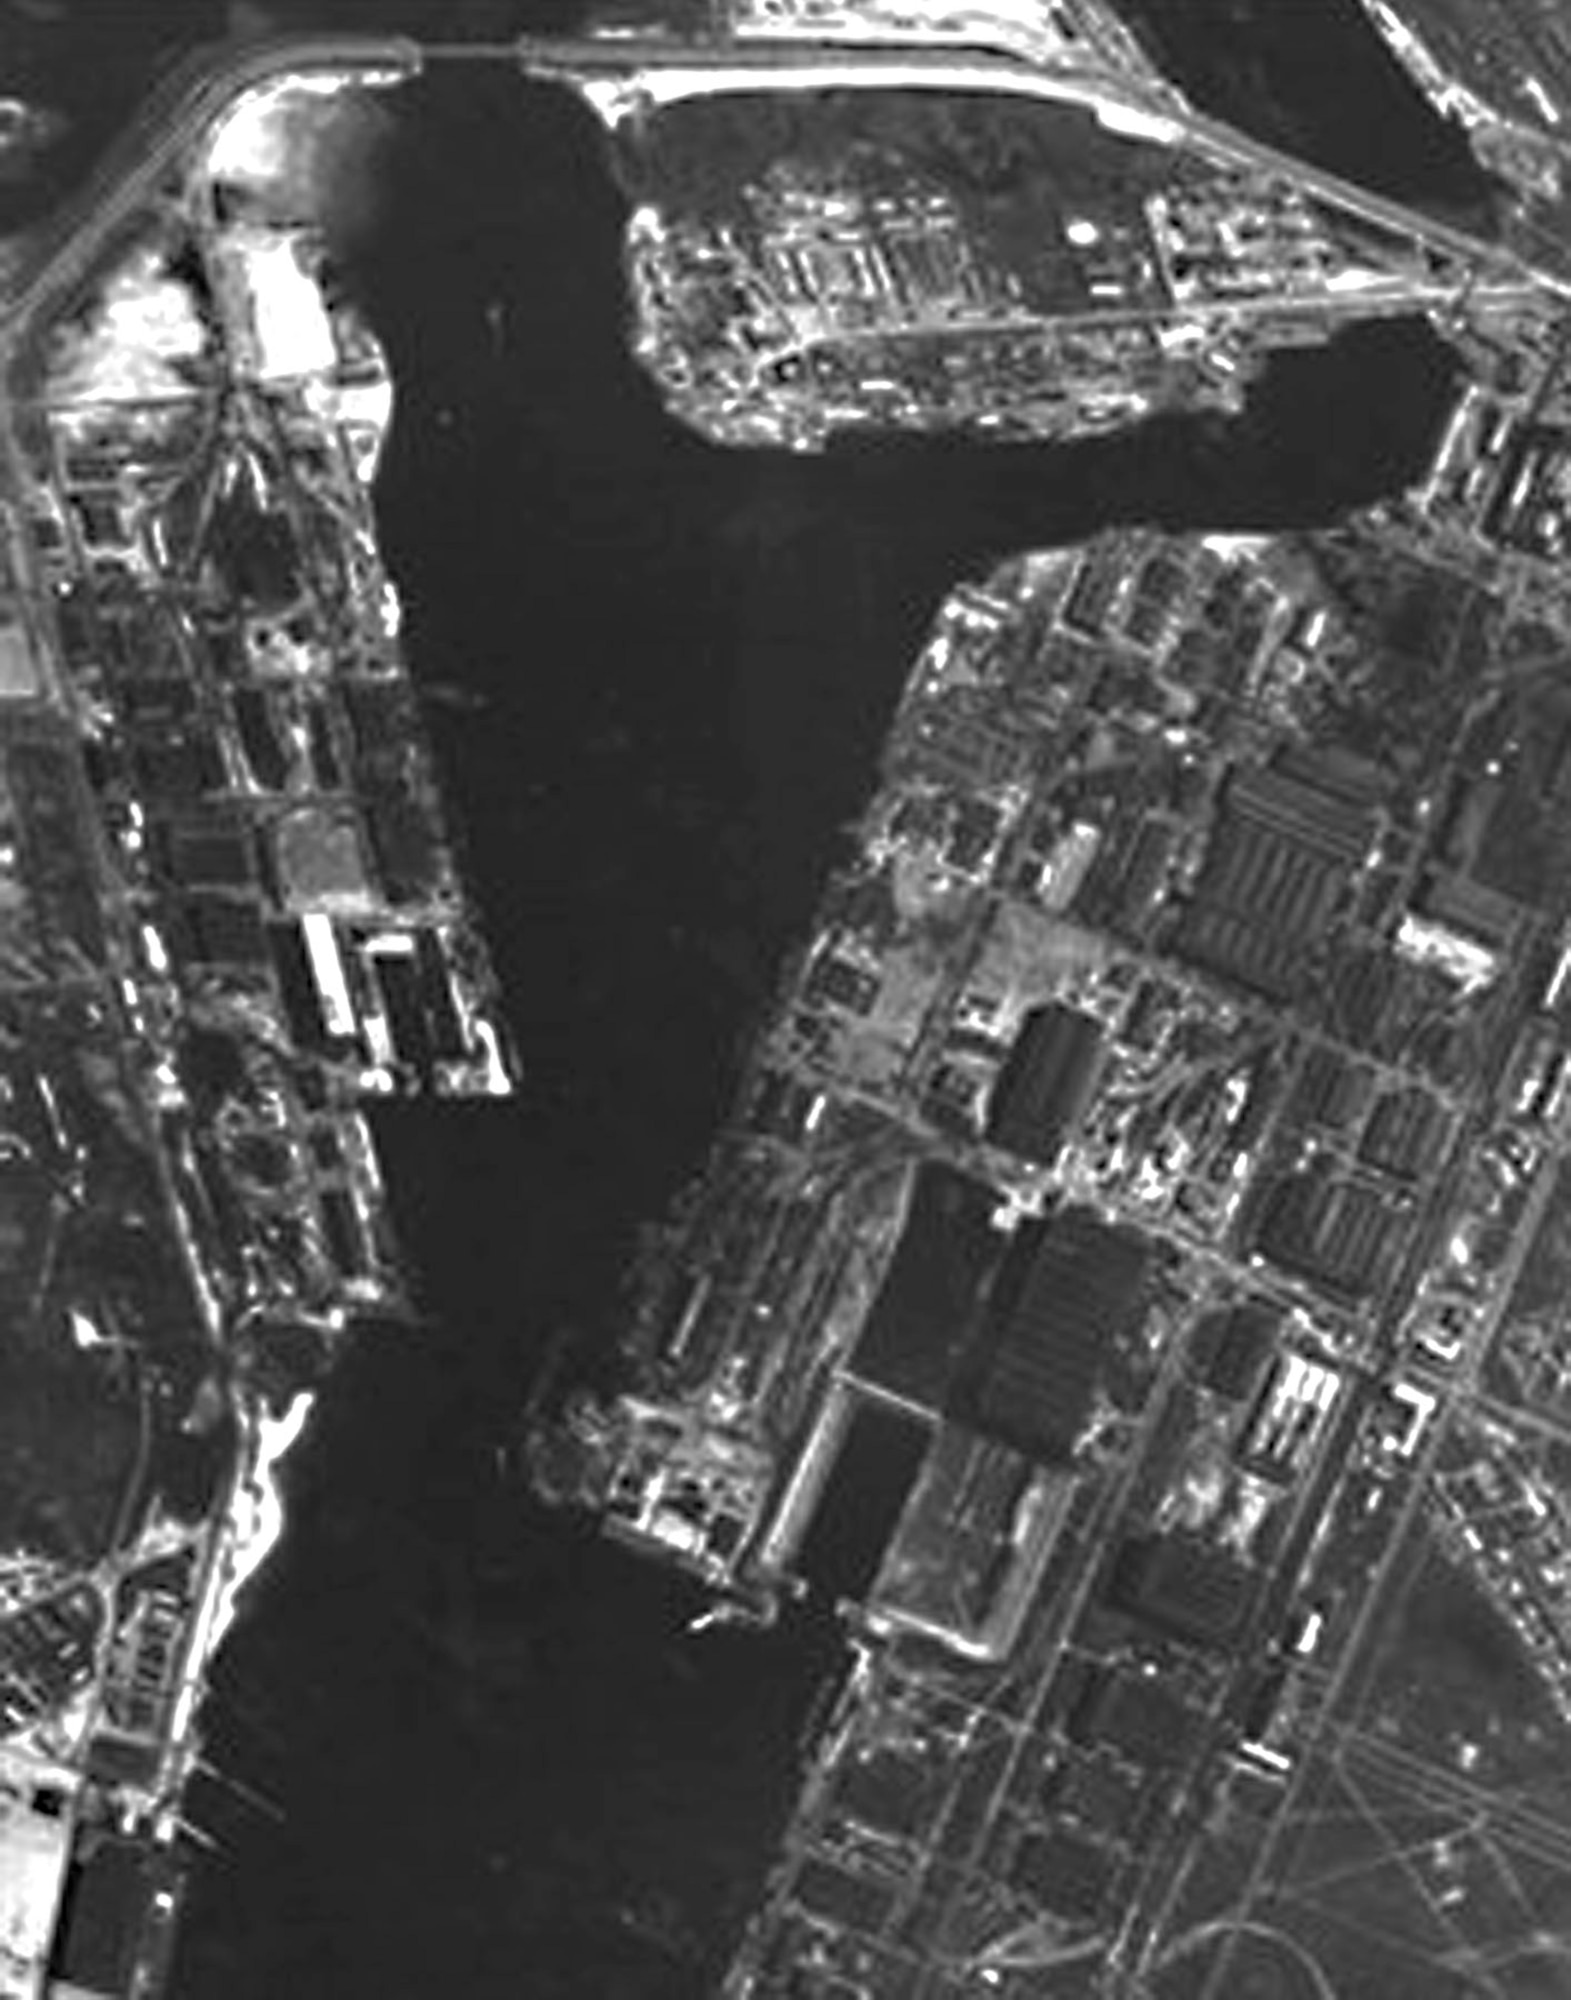 GAMBIT KH-7 image of the Severodvinsk shipyard in the USSR, May 29, 1967. (Photo courtesy of U.S. Geological Survey)